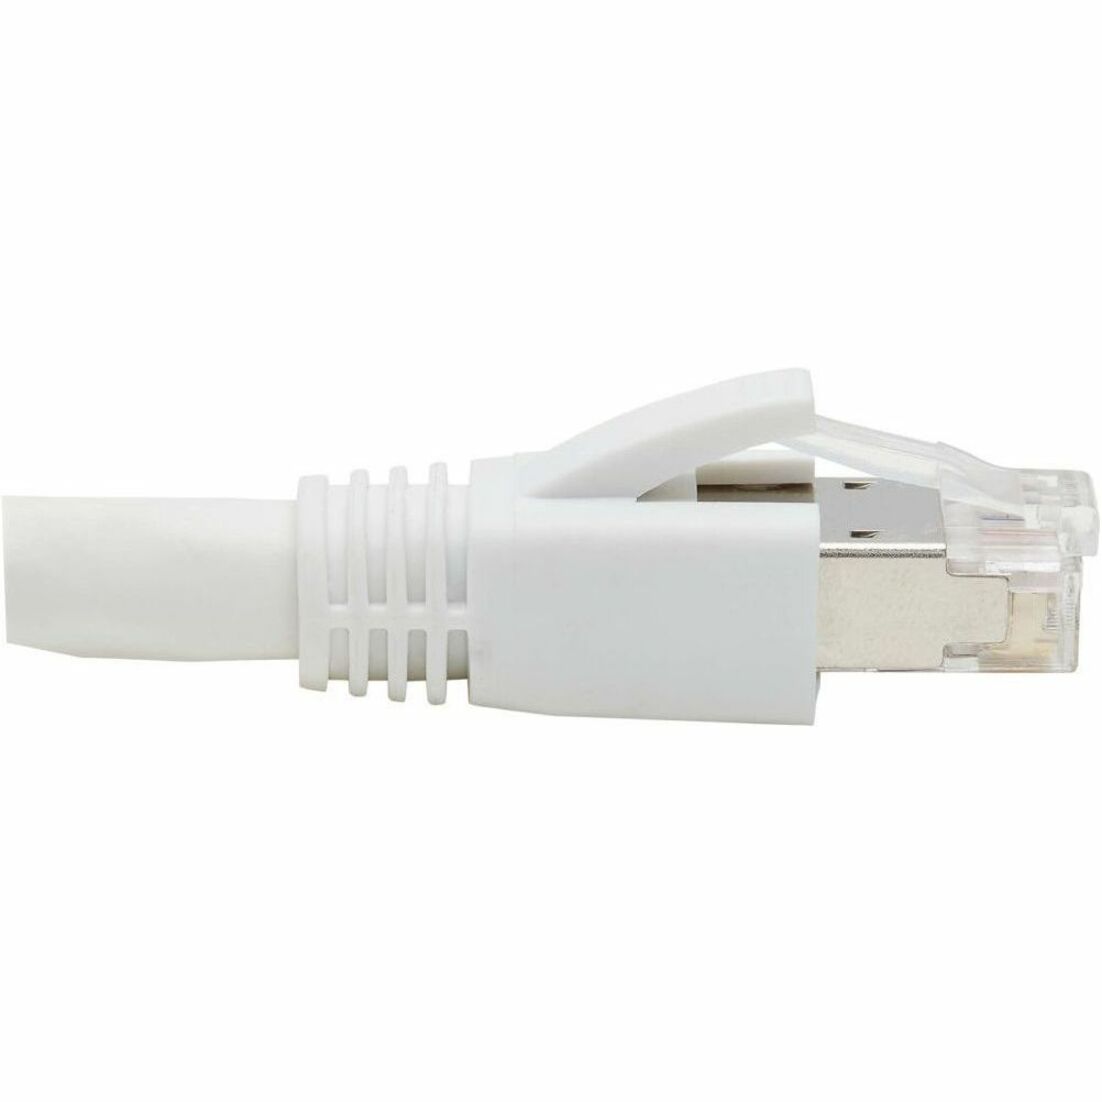 Tripp Lite N272-F05-WH Cat8 40G Snagless SSTP Ethernet Cable (RJ45 M/M), PoE, White, 5 ft. (1.5 m)